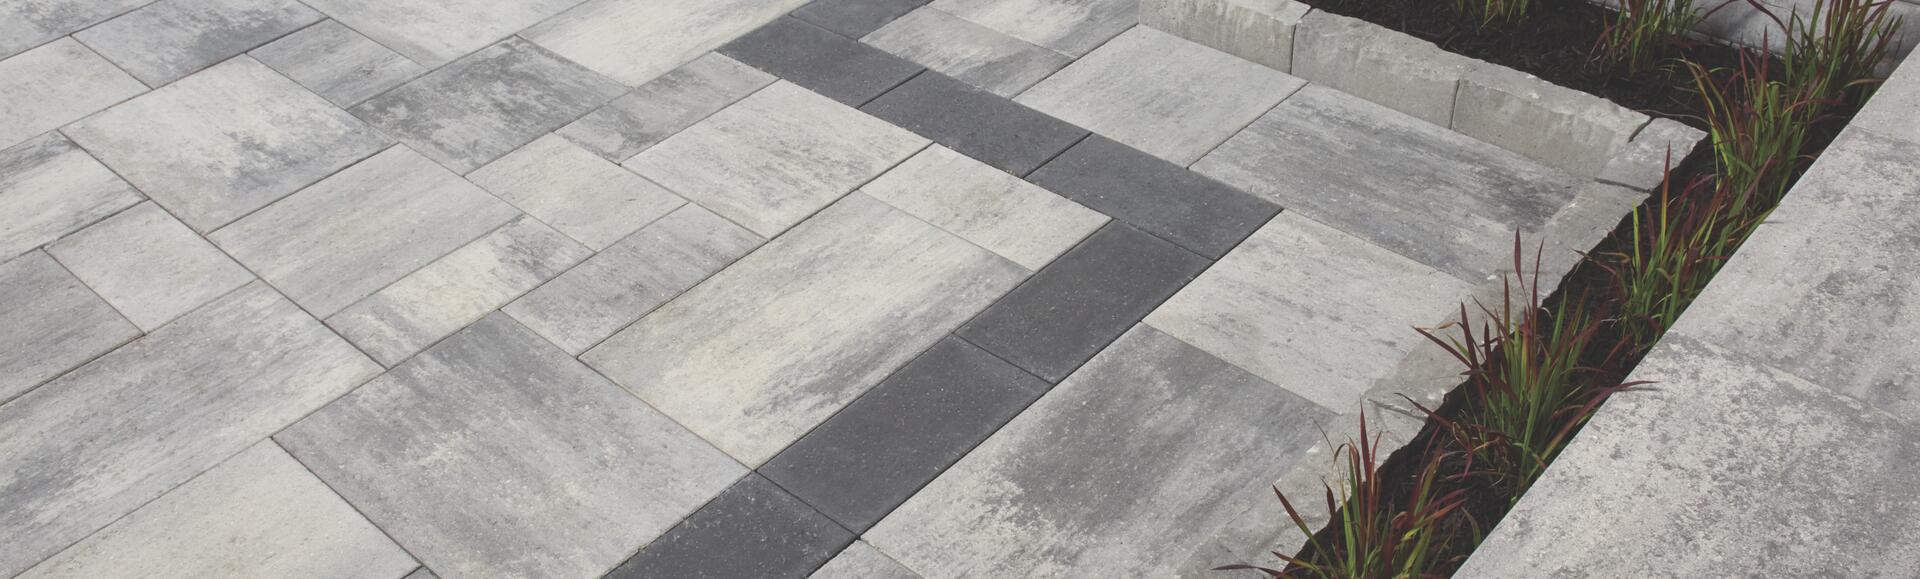 Nueva Paver in Marble Grey by Oaks Landscape Products